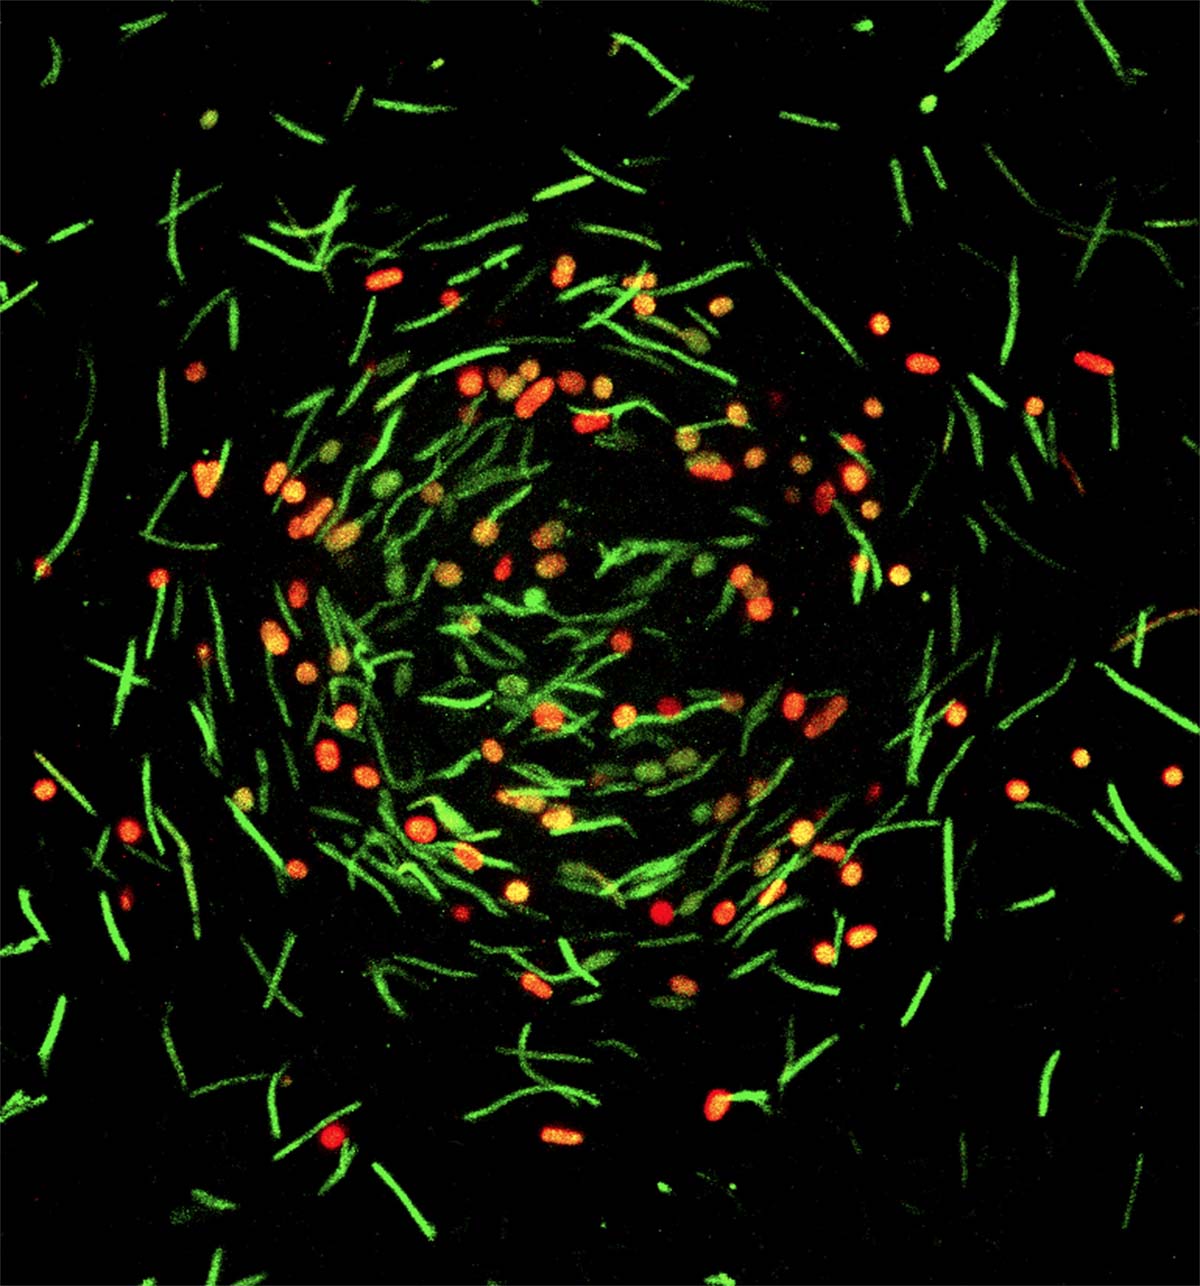 A microscope image shows a mound of M. xanthus cells transitioning from their normal, rod-like state (green) to orb-like spores (red).